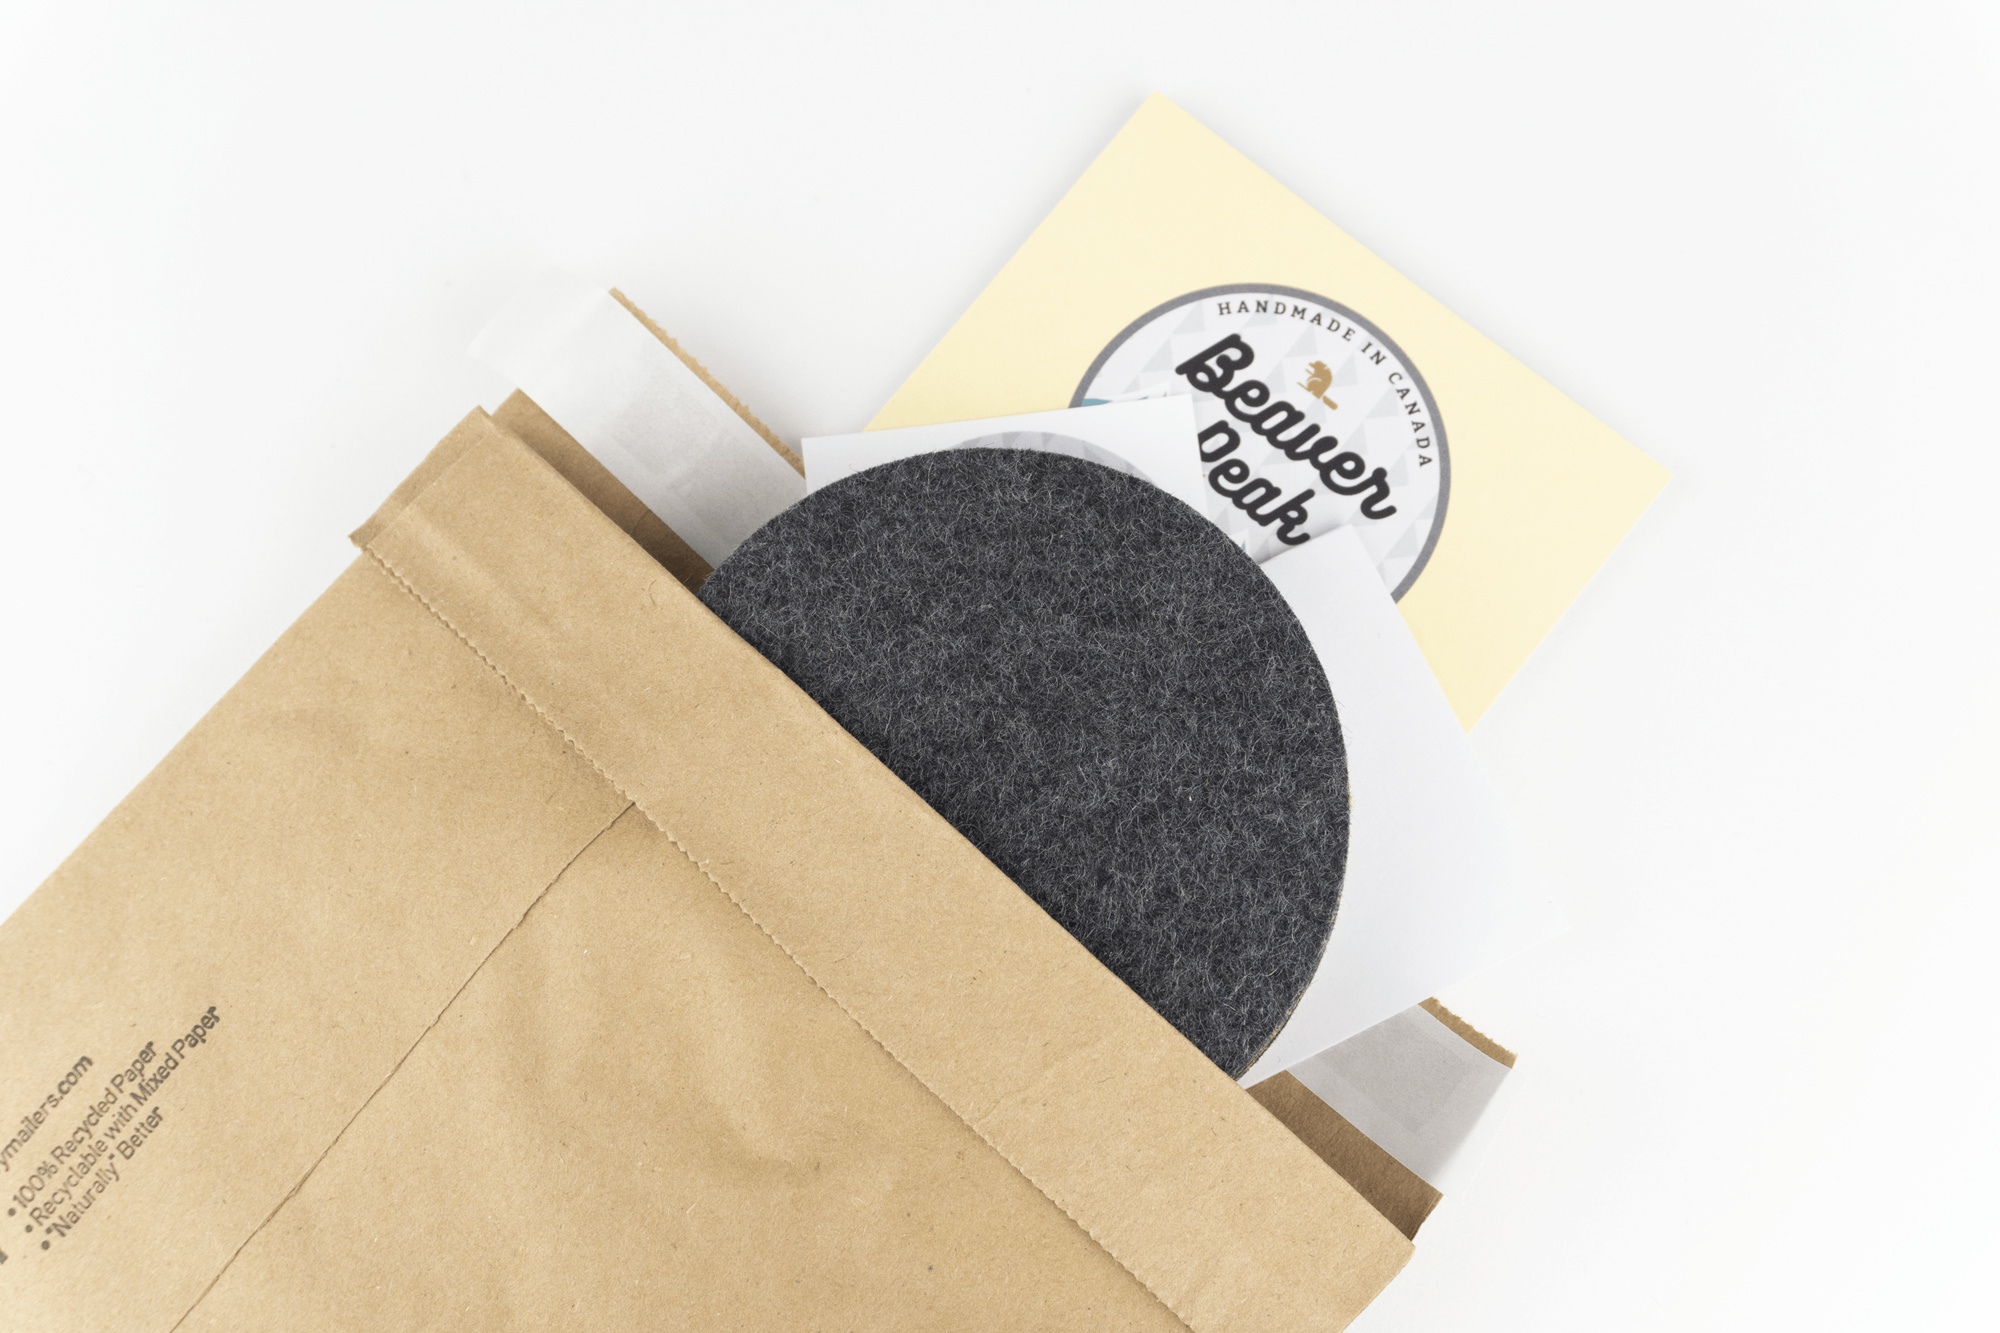 The recyclable kraft paper packaging we use for our circular desk coasters shown up close.